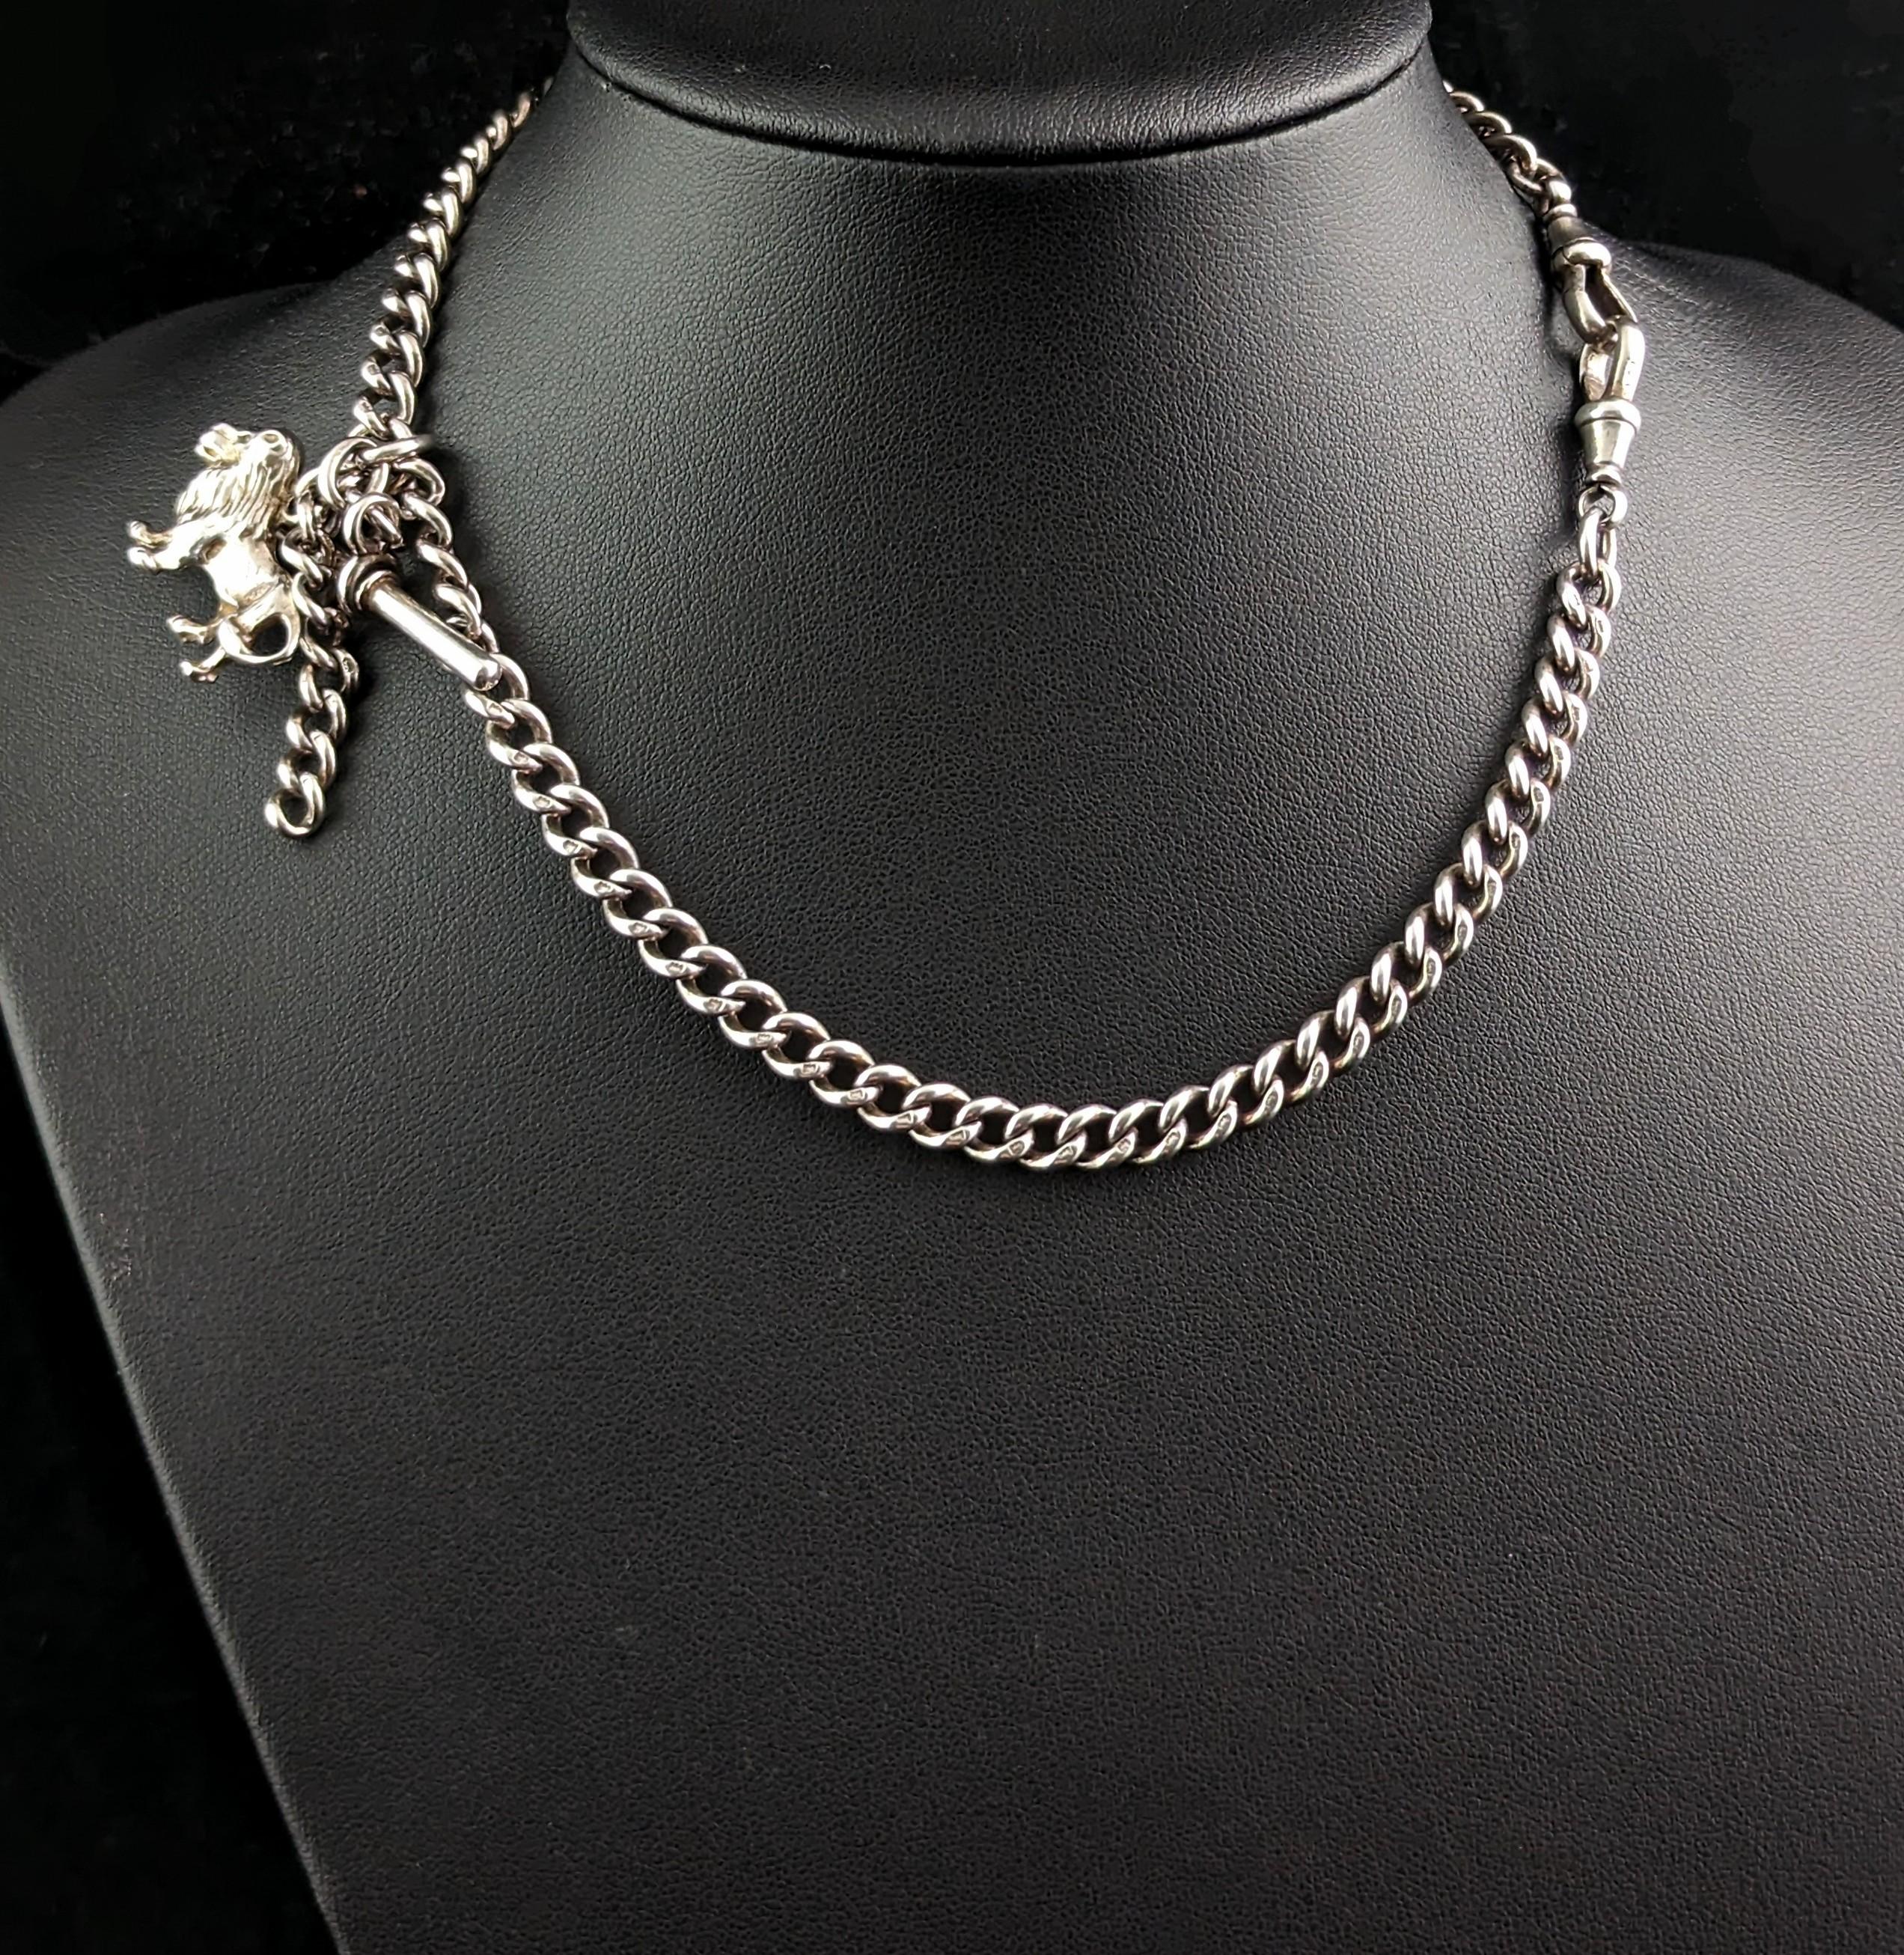 You can't help but fall in love with this handsome antique Albert chain.

It is a sterling silver chain with a curb link, it has dog clip fasteners to each end with a T bar and the most fantastic antique silver lion fob.

The fob could also be used